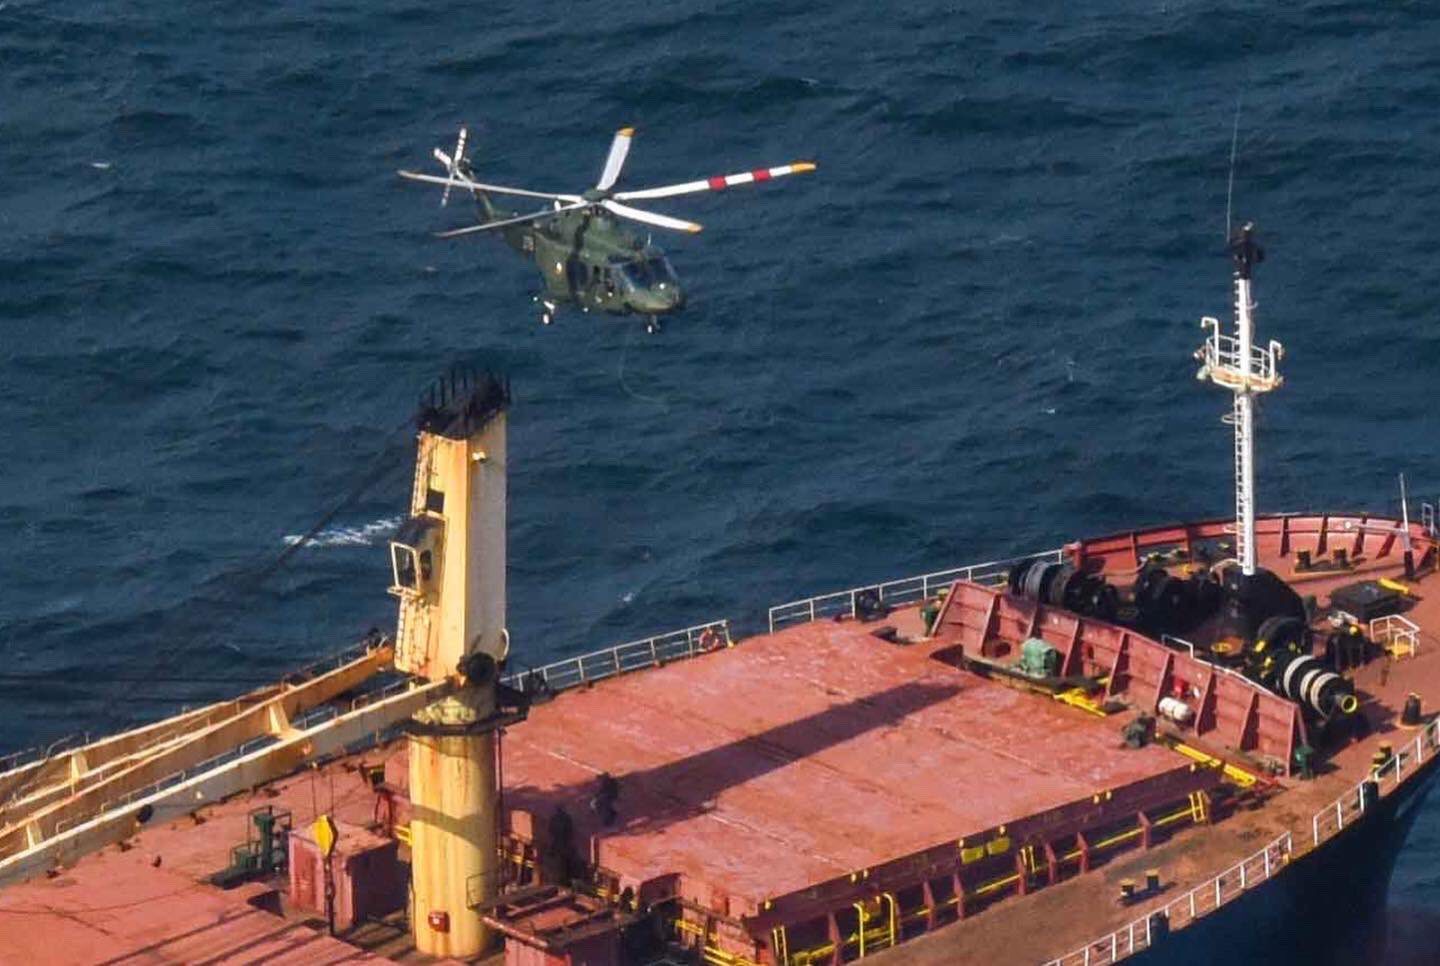 An Irish Defence Force helicopter flies above the deck of the Matthew bulk carrier